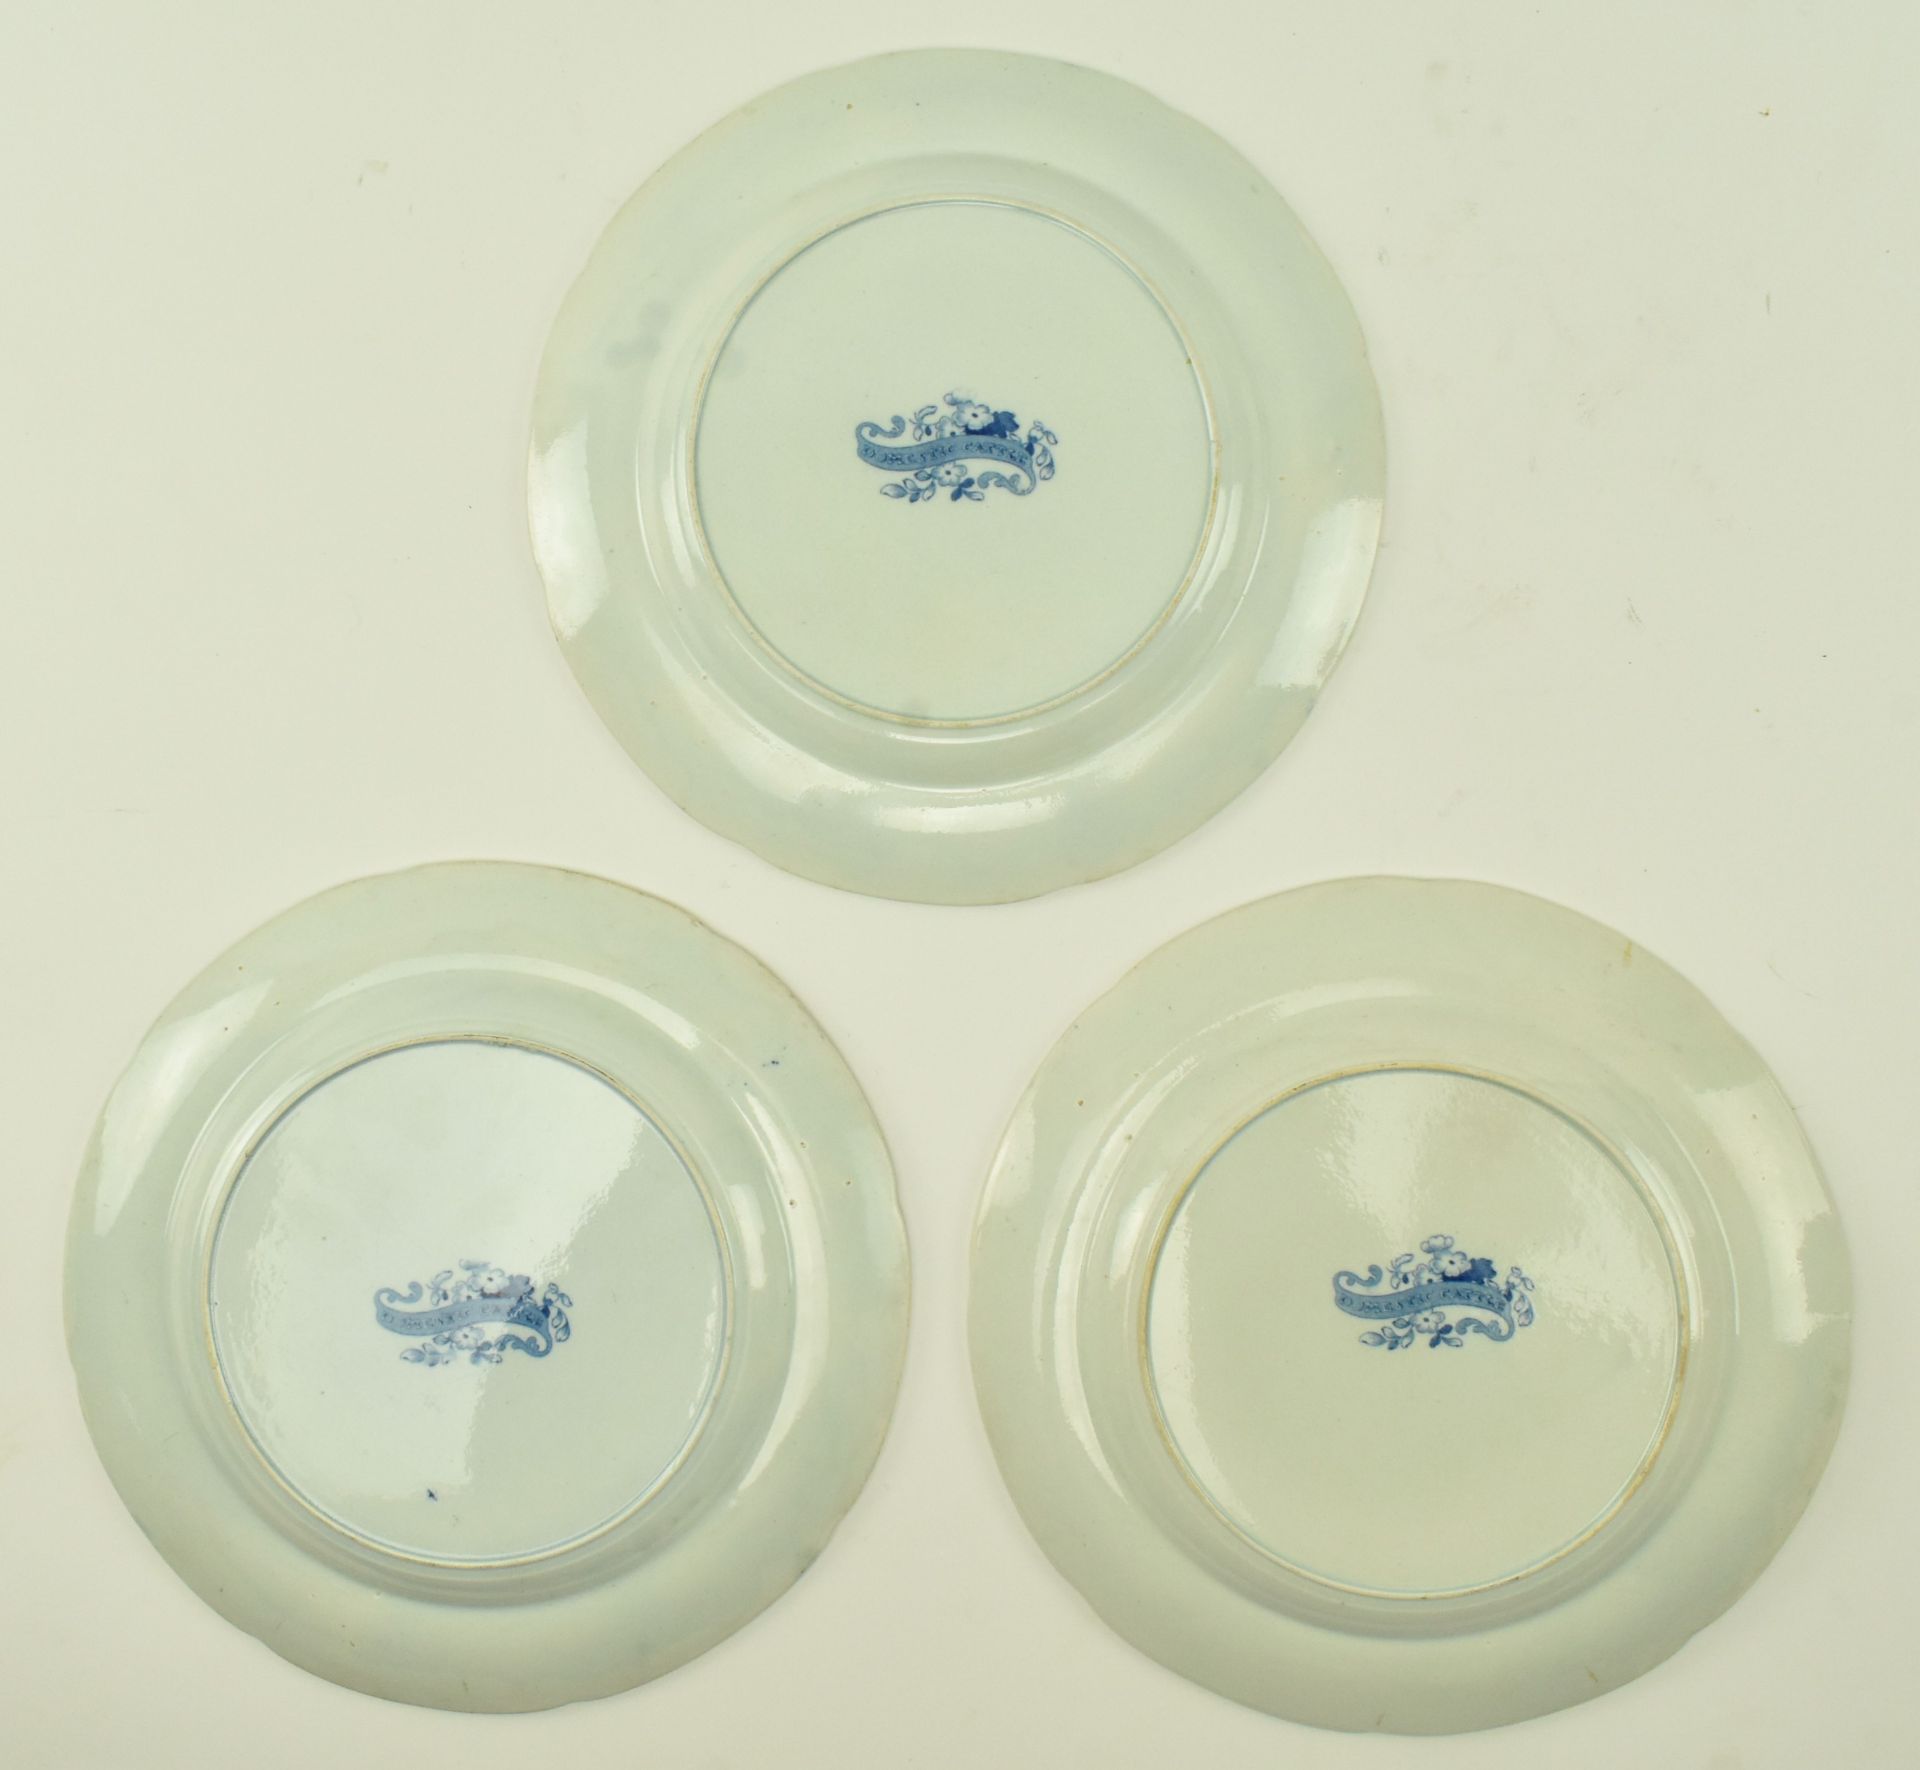 THREE CIRCA 1820S PEARLWARE DOMESTIC CATTLE PLATES - Image 5 of 6